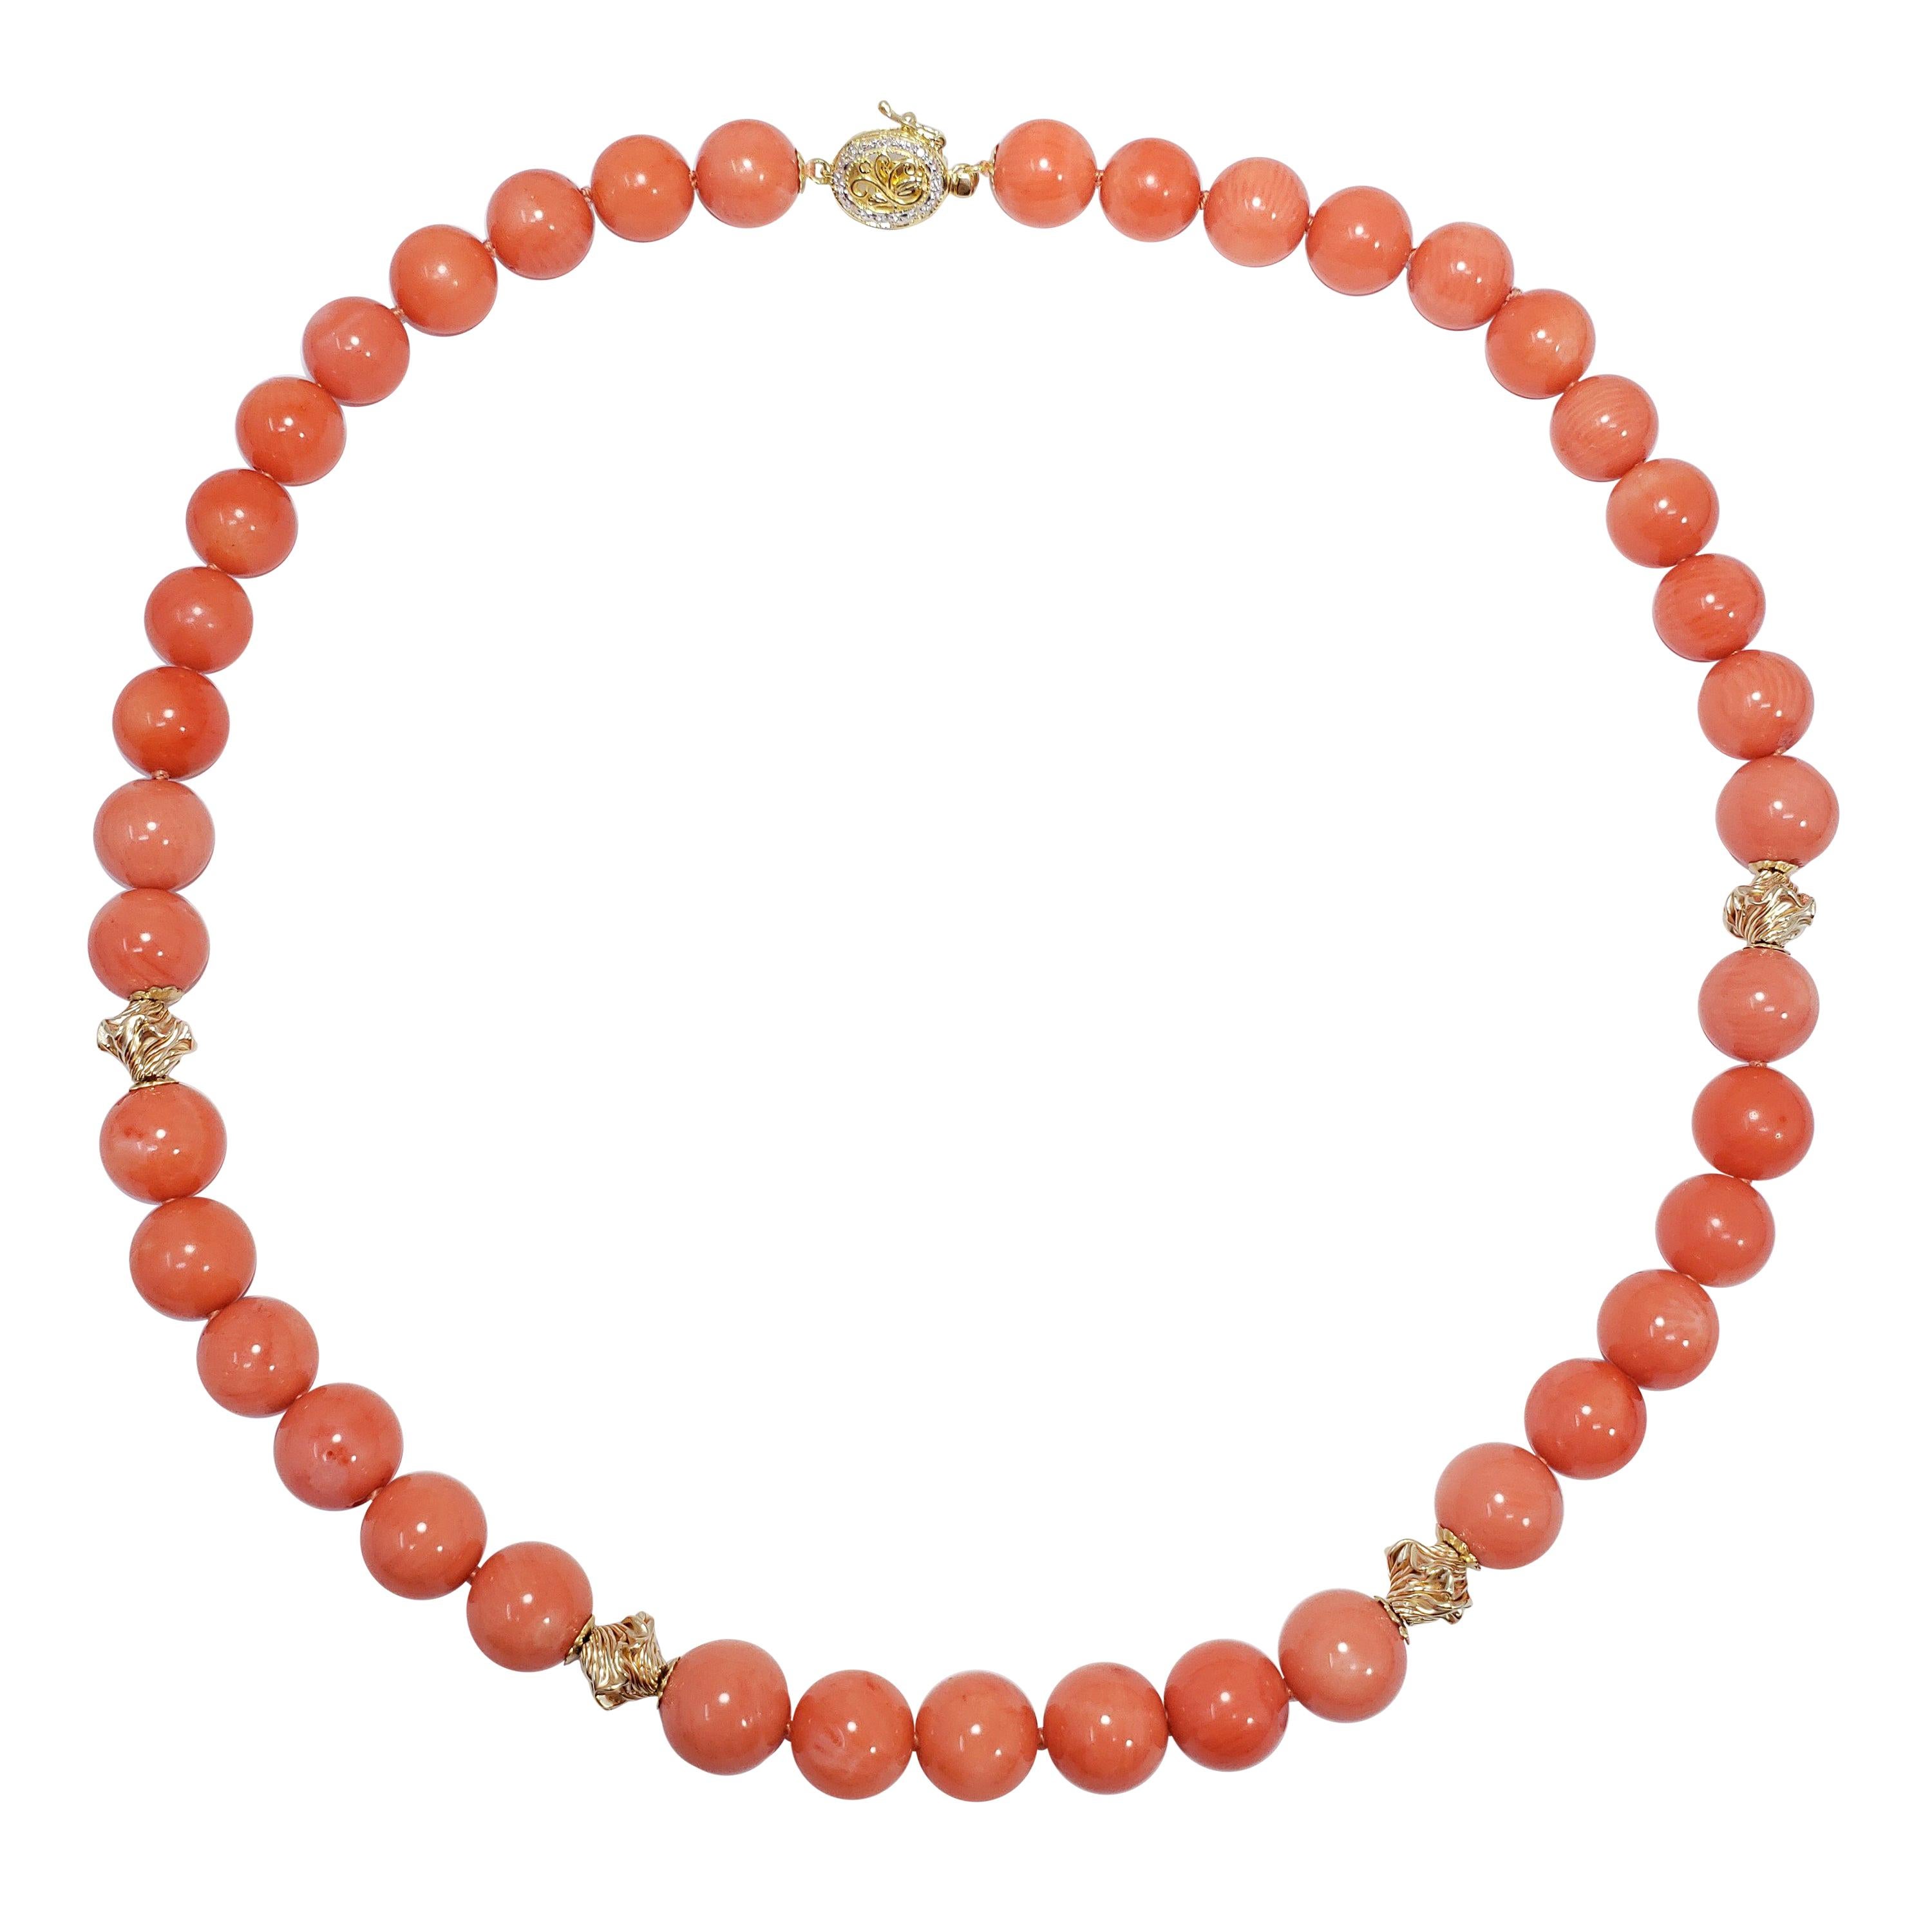 Gold and Diamond Accented Salmon Coral Bead Knotted String Necklace, 14 Karat